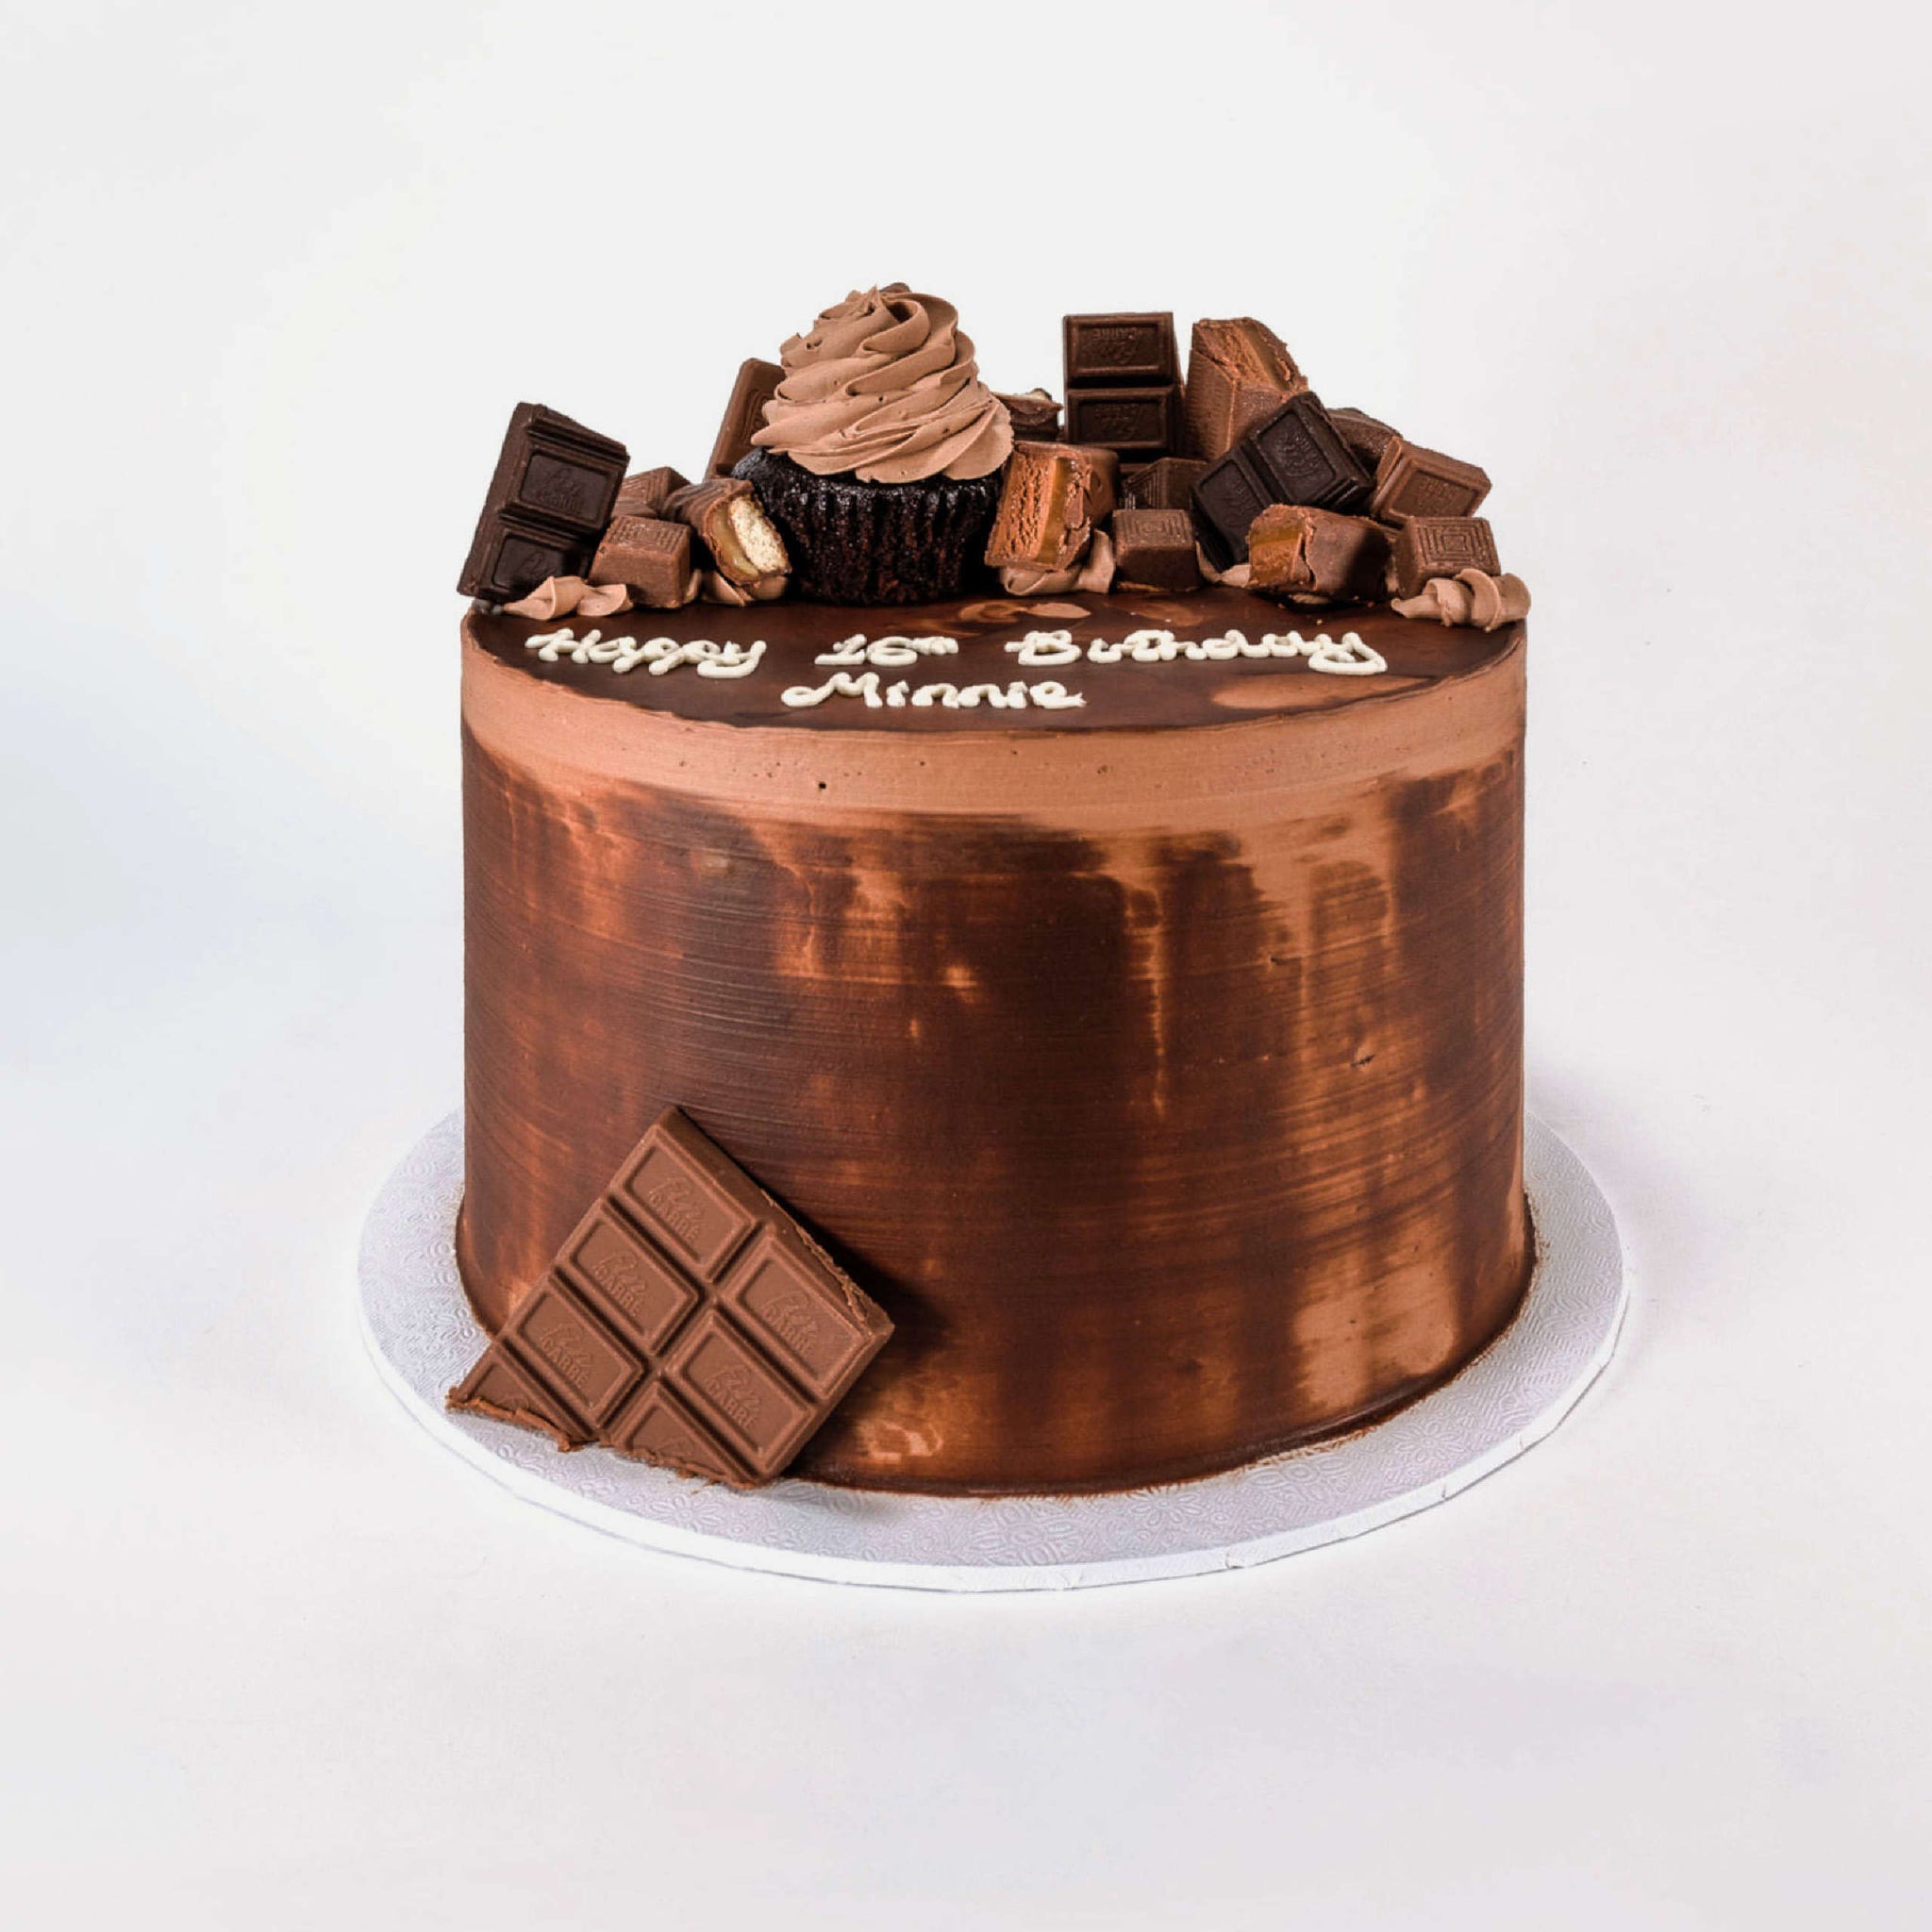 Chocolate overload cake - #1 in online cakes in Gurgaon | Gurgaon Bakers